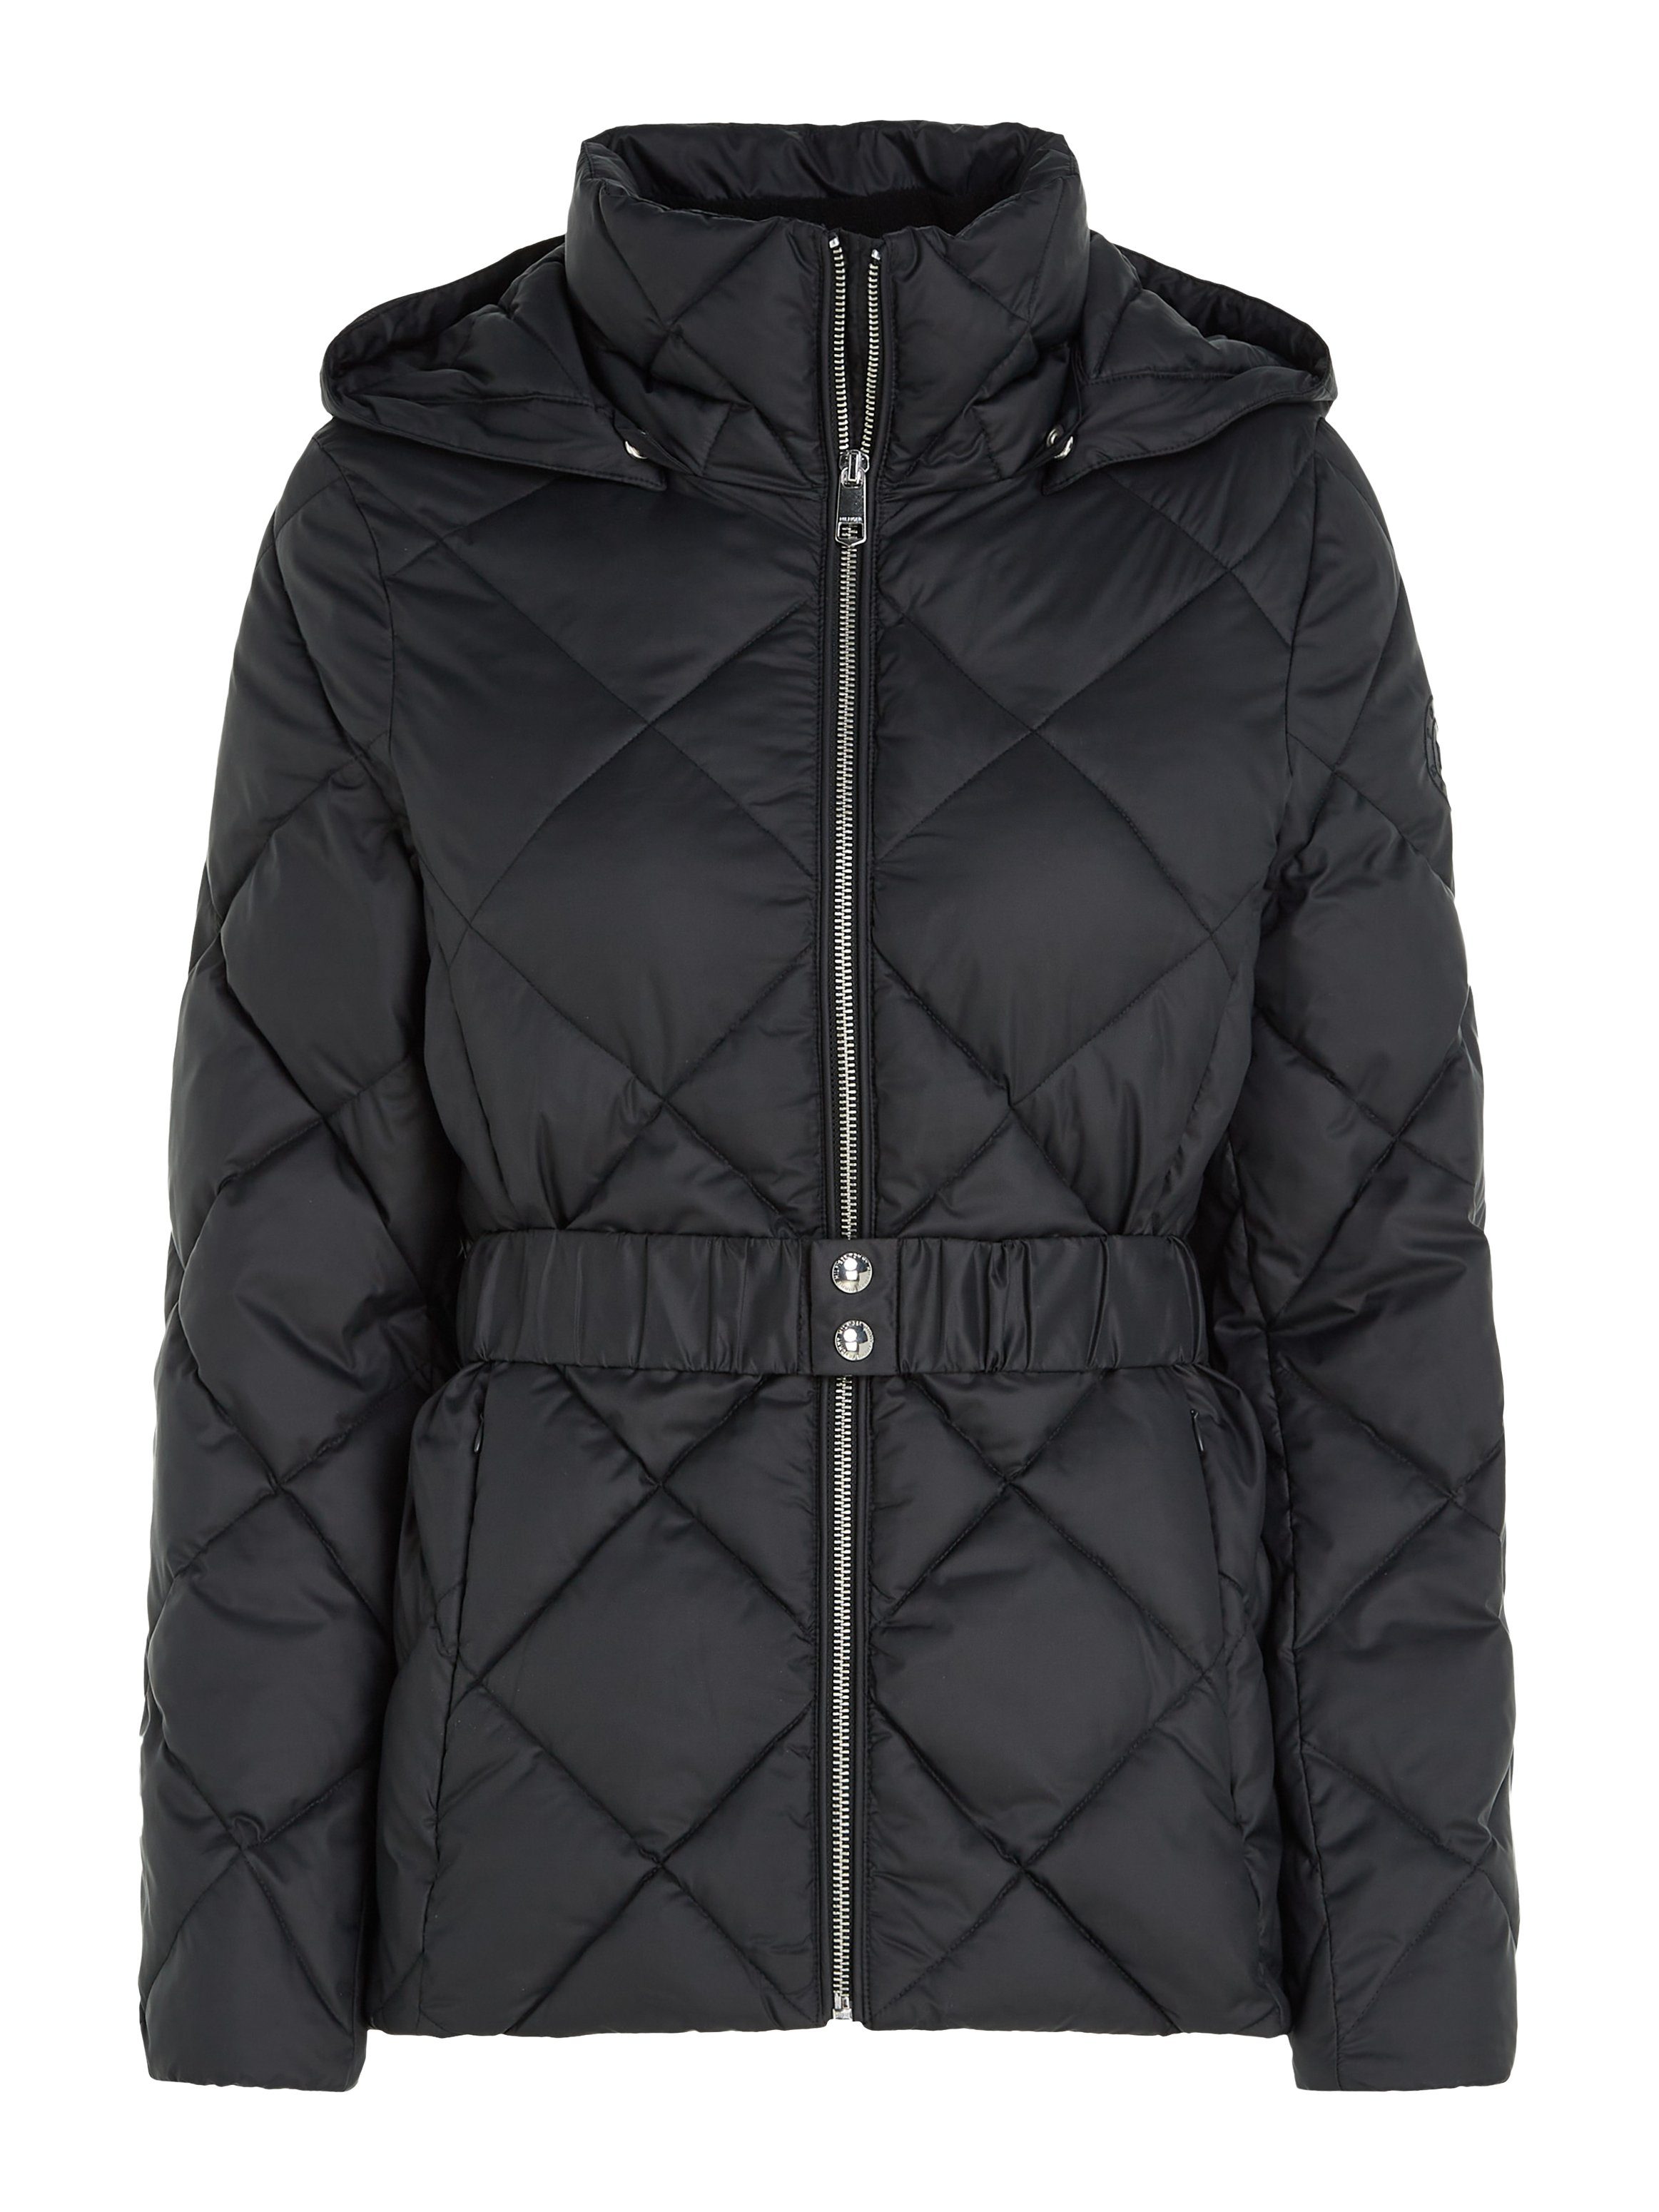 Logostickerei ELEVATED mit QUILTED JACKET Hilfiger Steppjacke BELTED Tommy